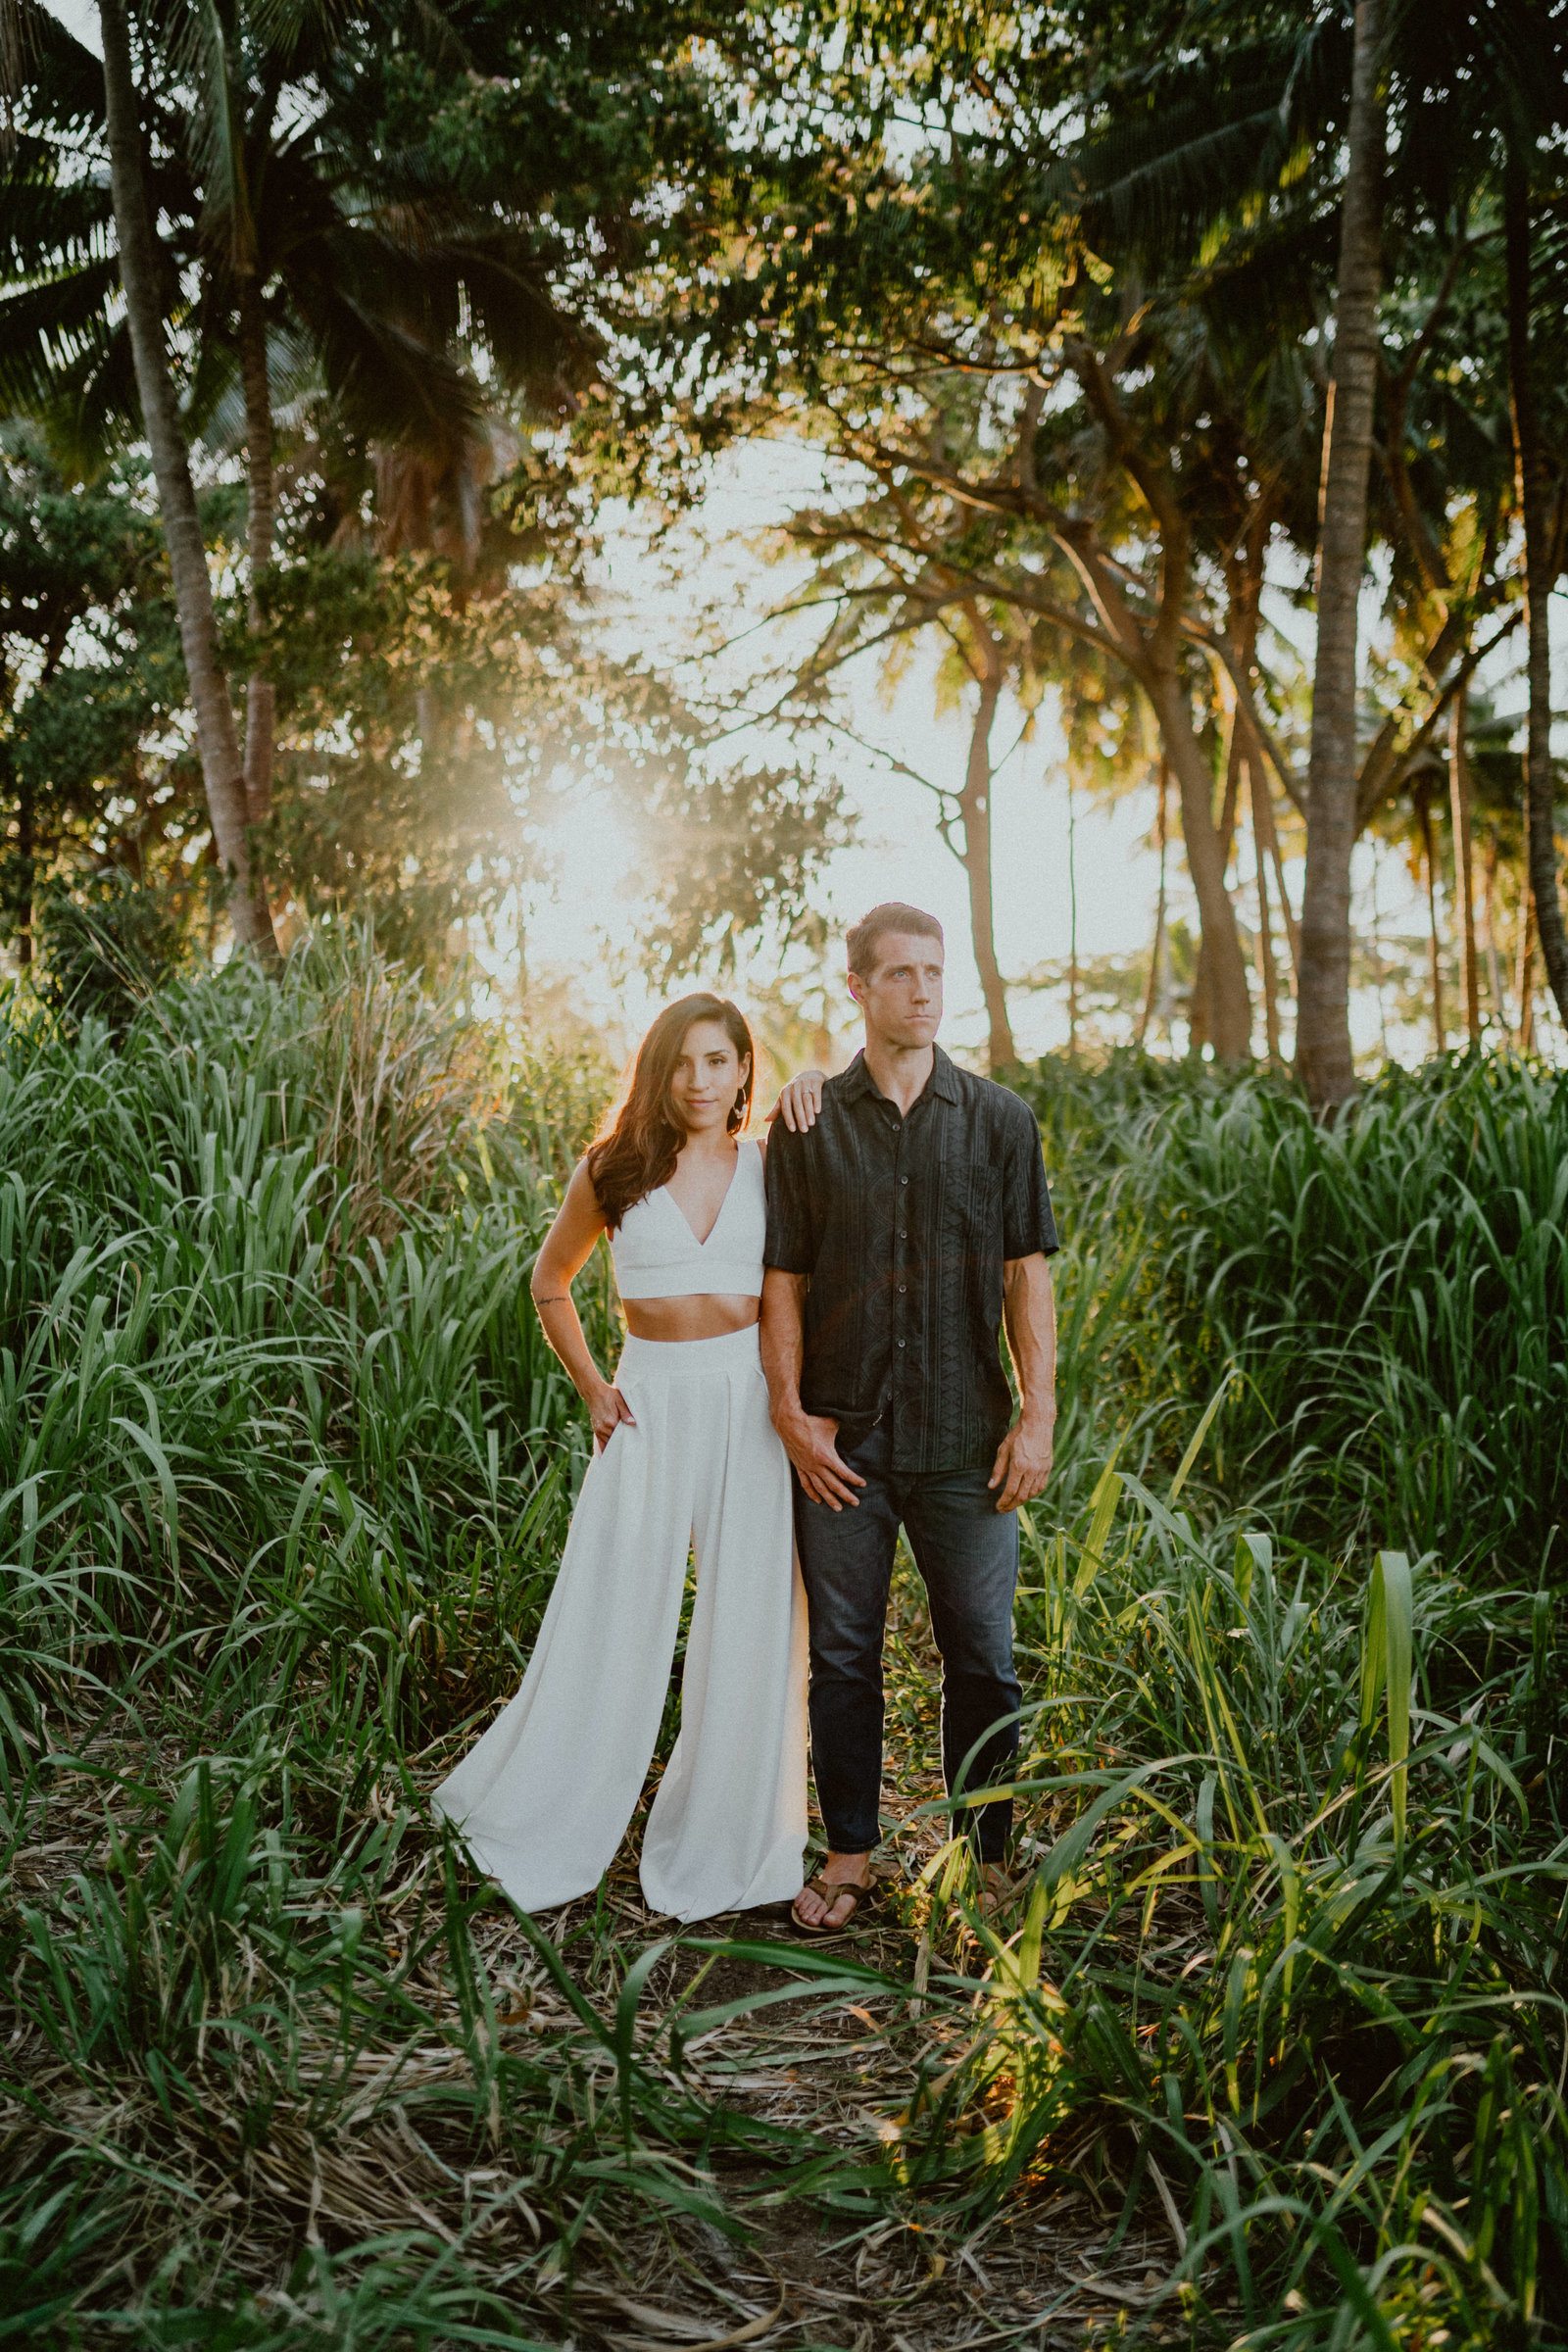 dillingham-ranch-engagement-oahu-hawaii-chelsea-abril-photography-6522